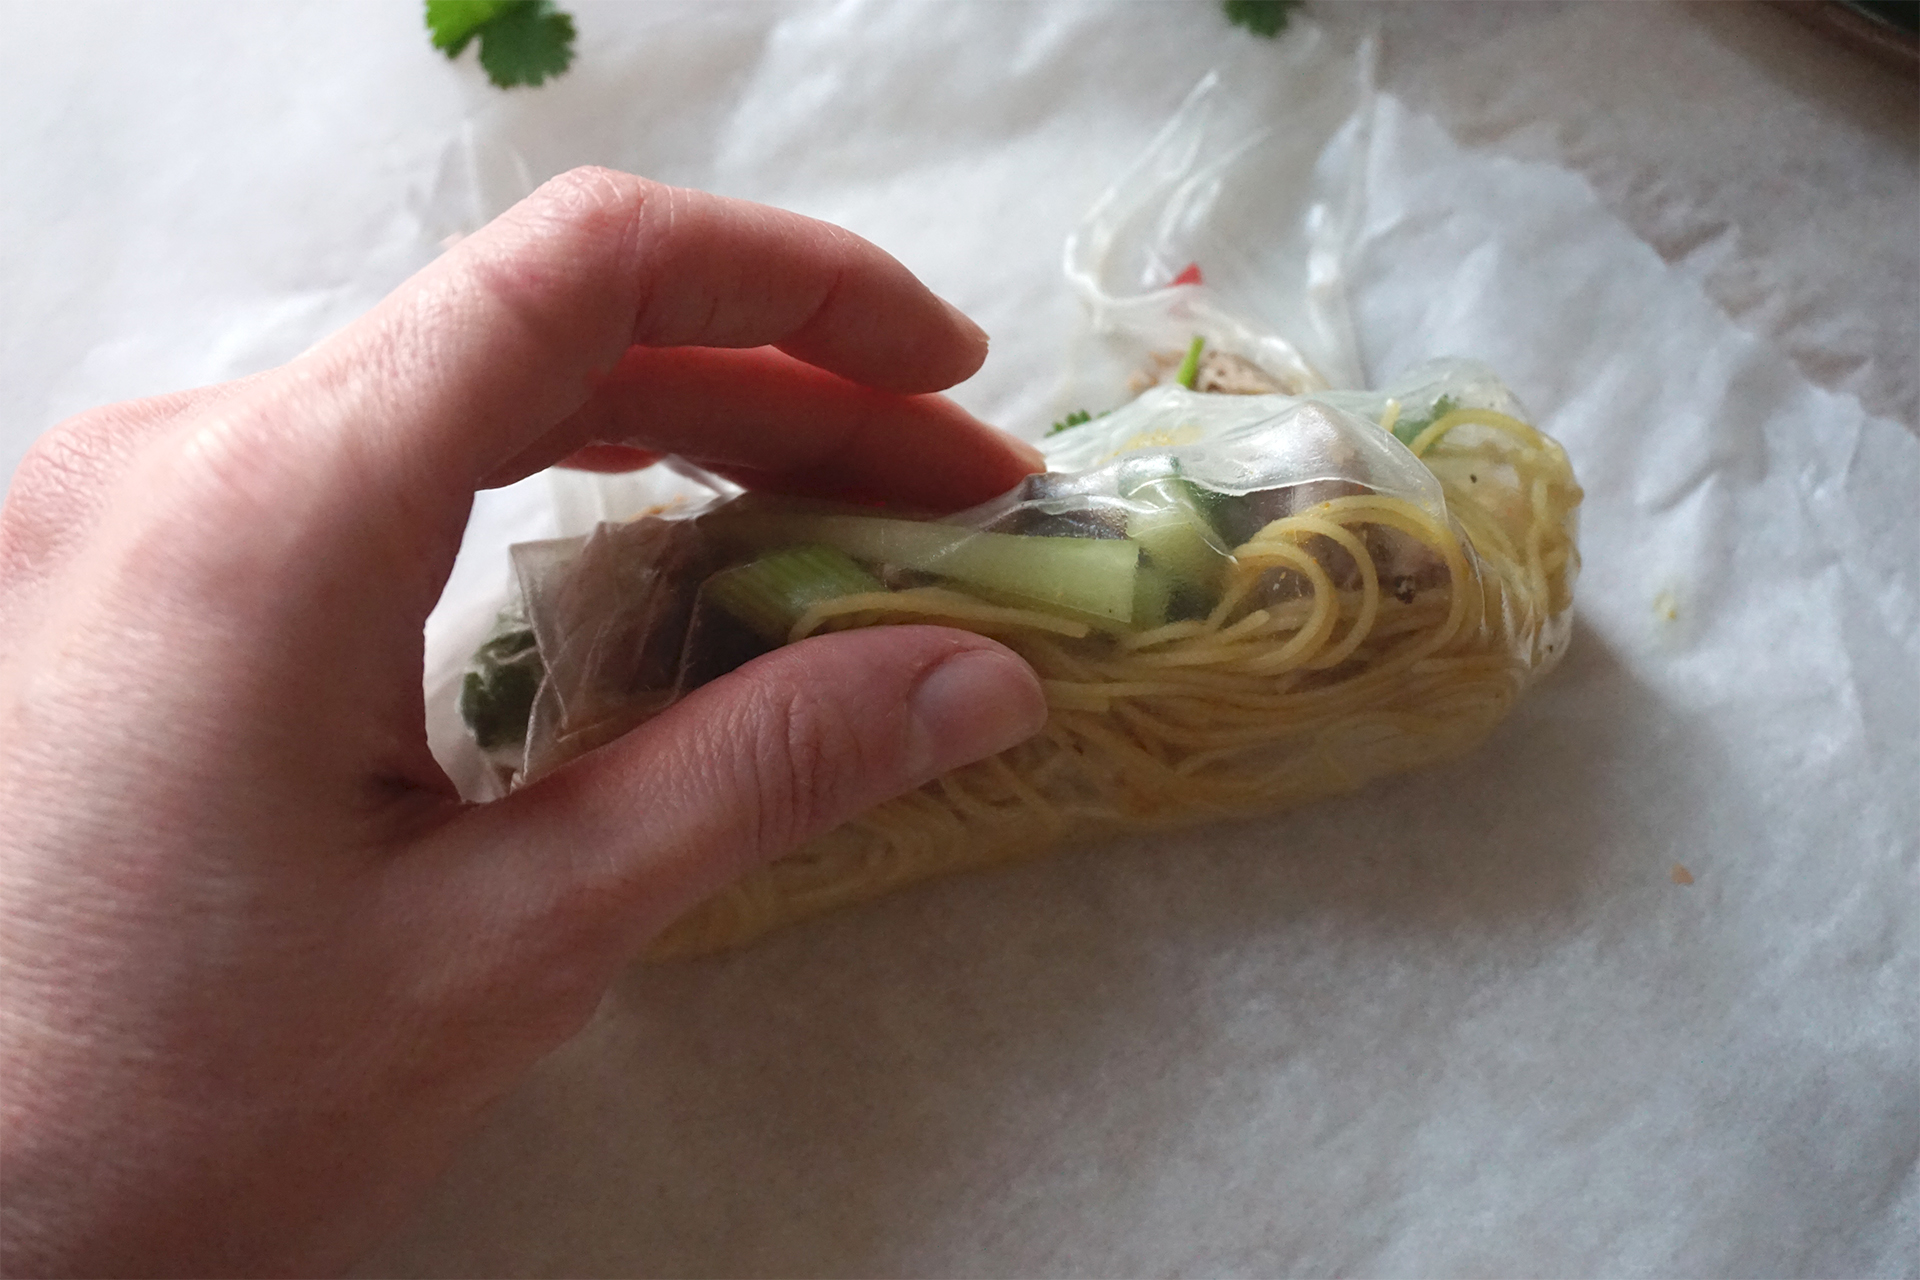 Gluten free Chinese crispy duck spring rolls made with easy Singapore noodles